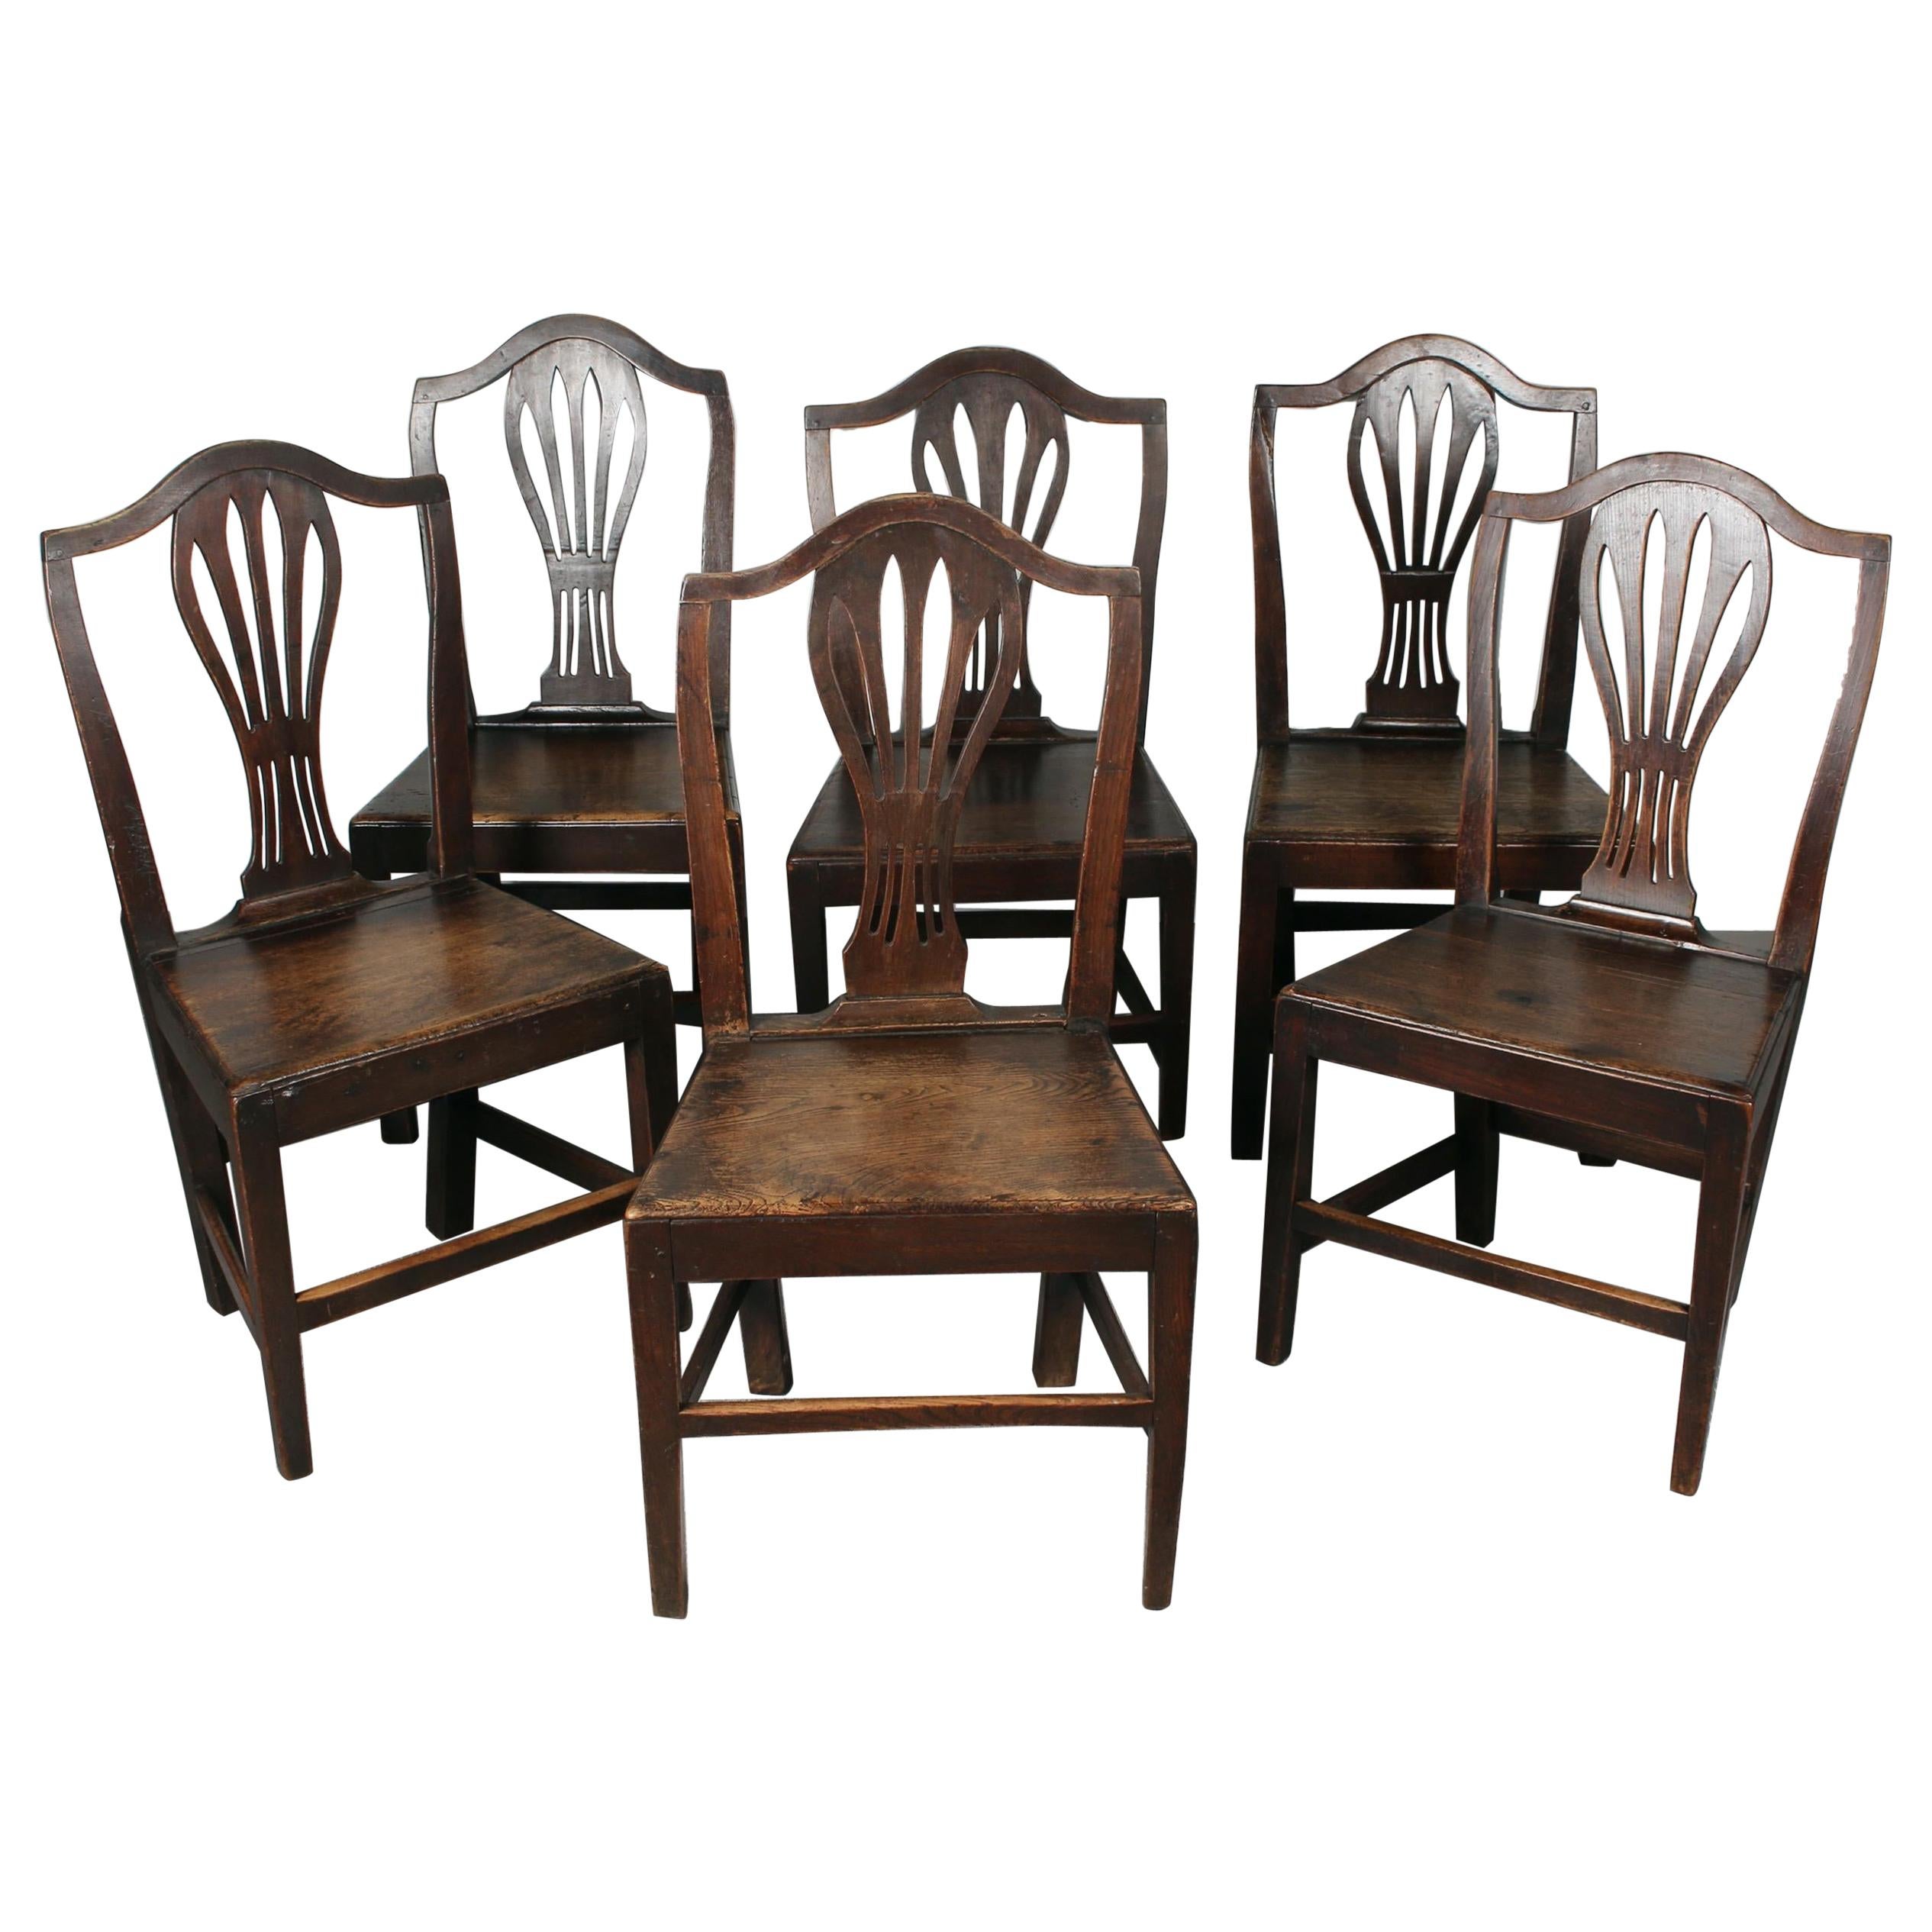 Set of English Country Chairs